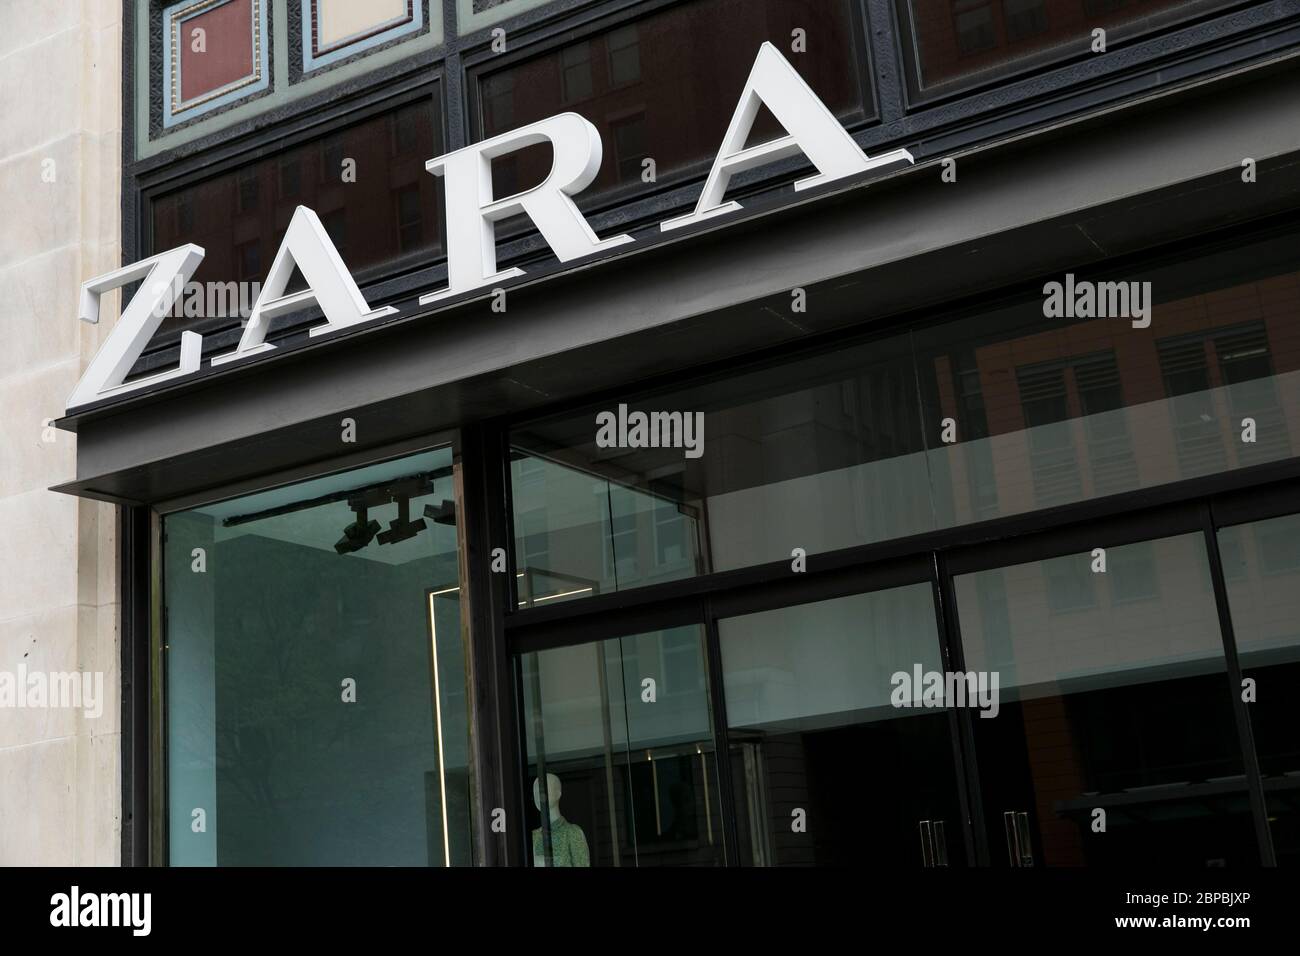 Page 3 - Zara High Resolution Stock Photography and Images - Alamy